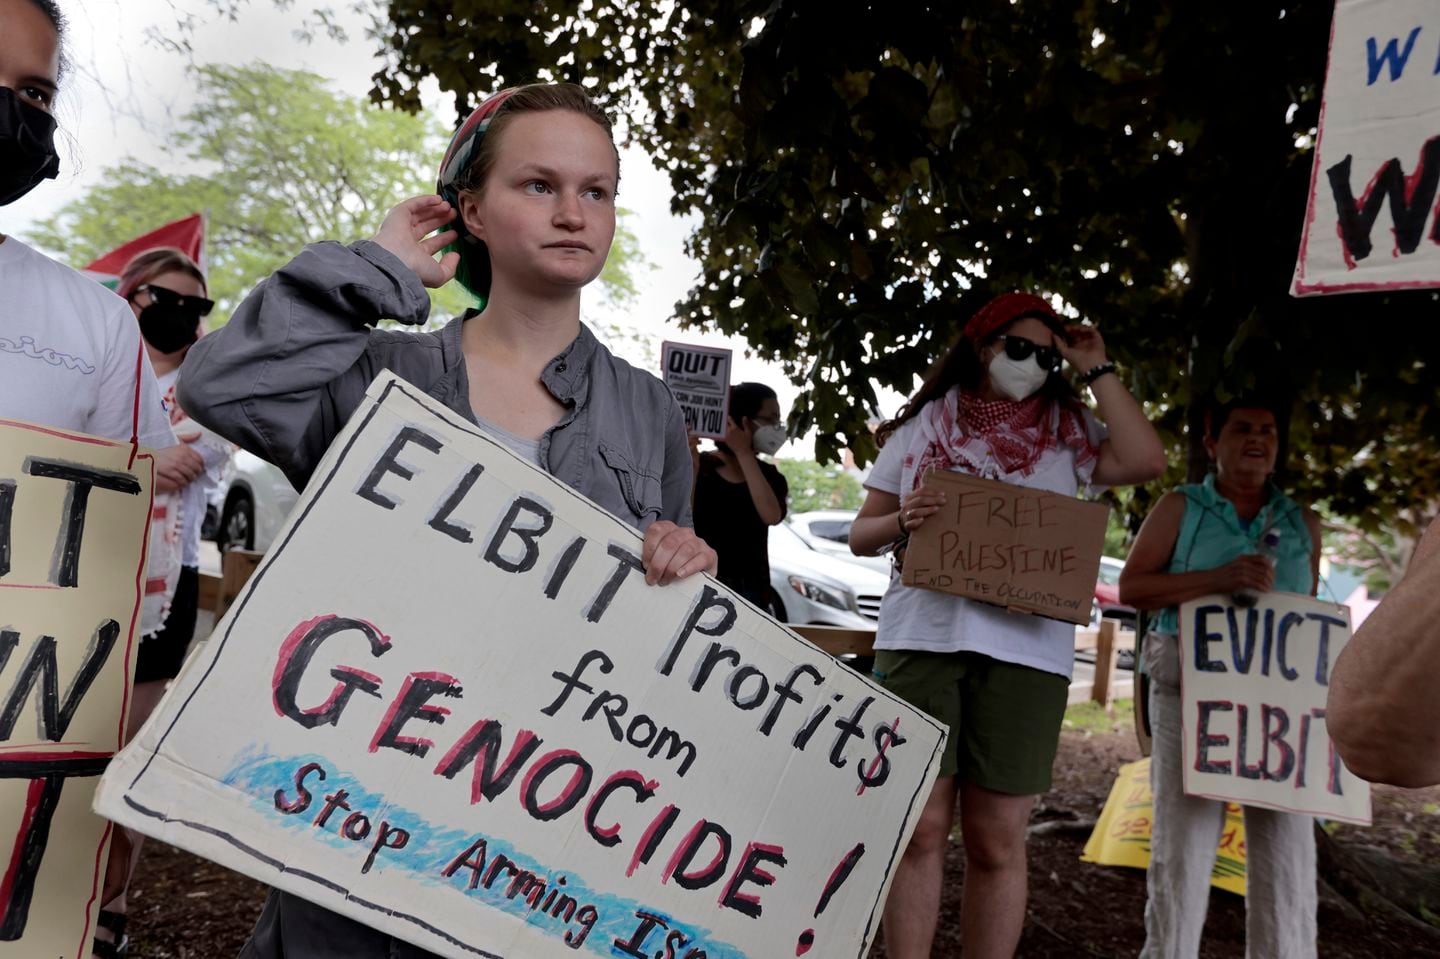 MIT rising sophomore Kate Pearce participated in a protest on June 12 in Cambridge outside the offices of Elbit Systems, a company that does work for the Israeli military.